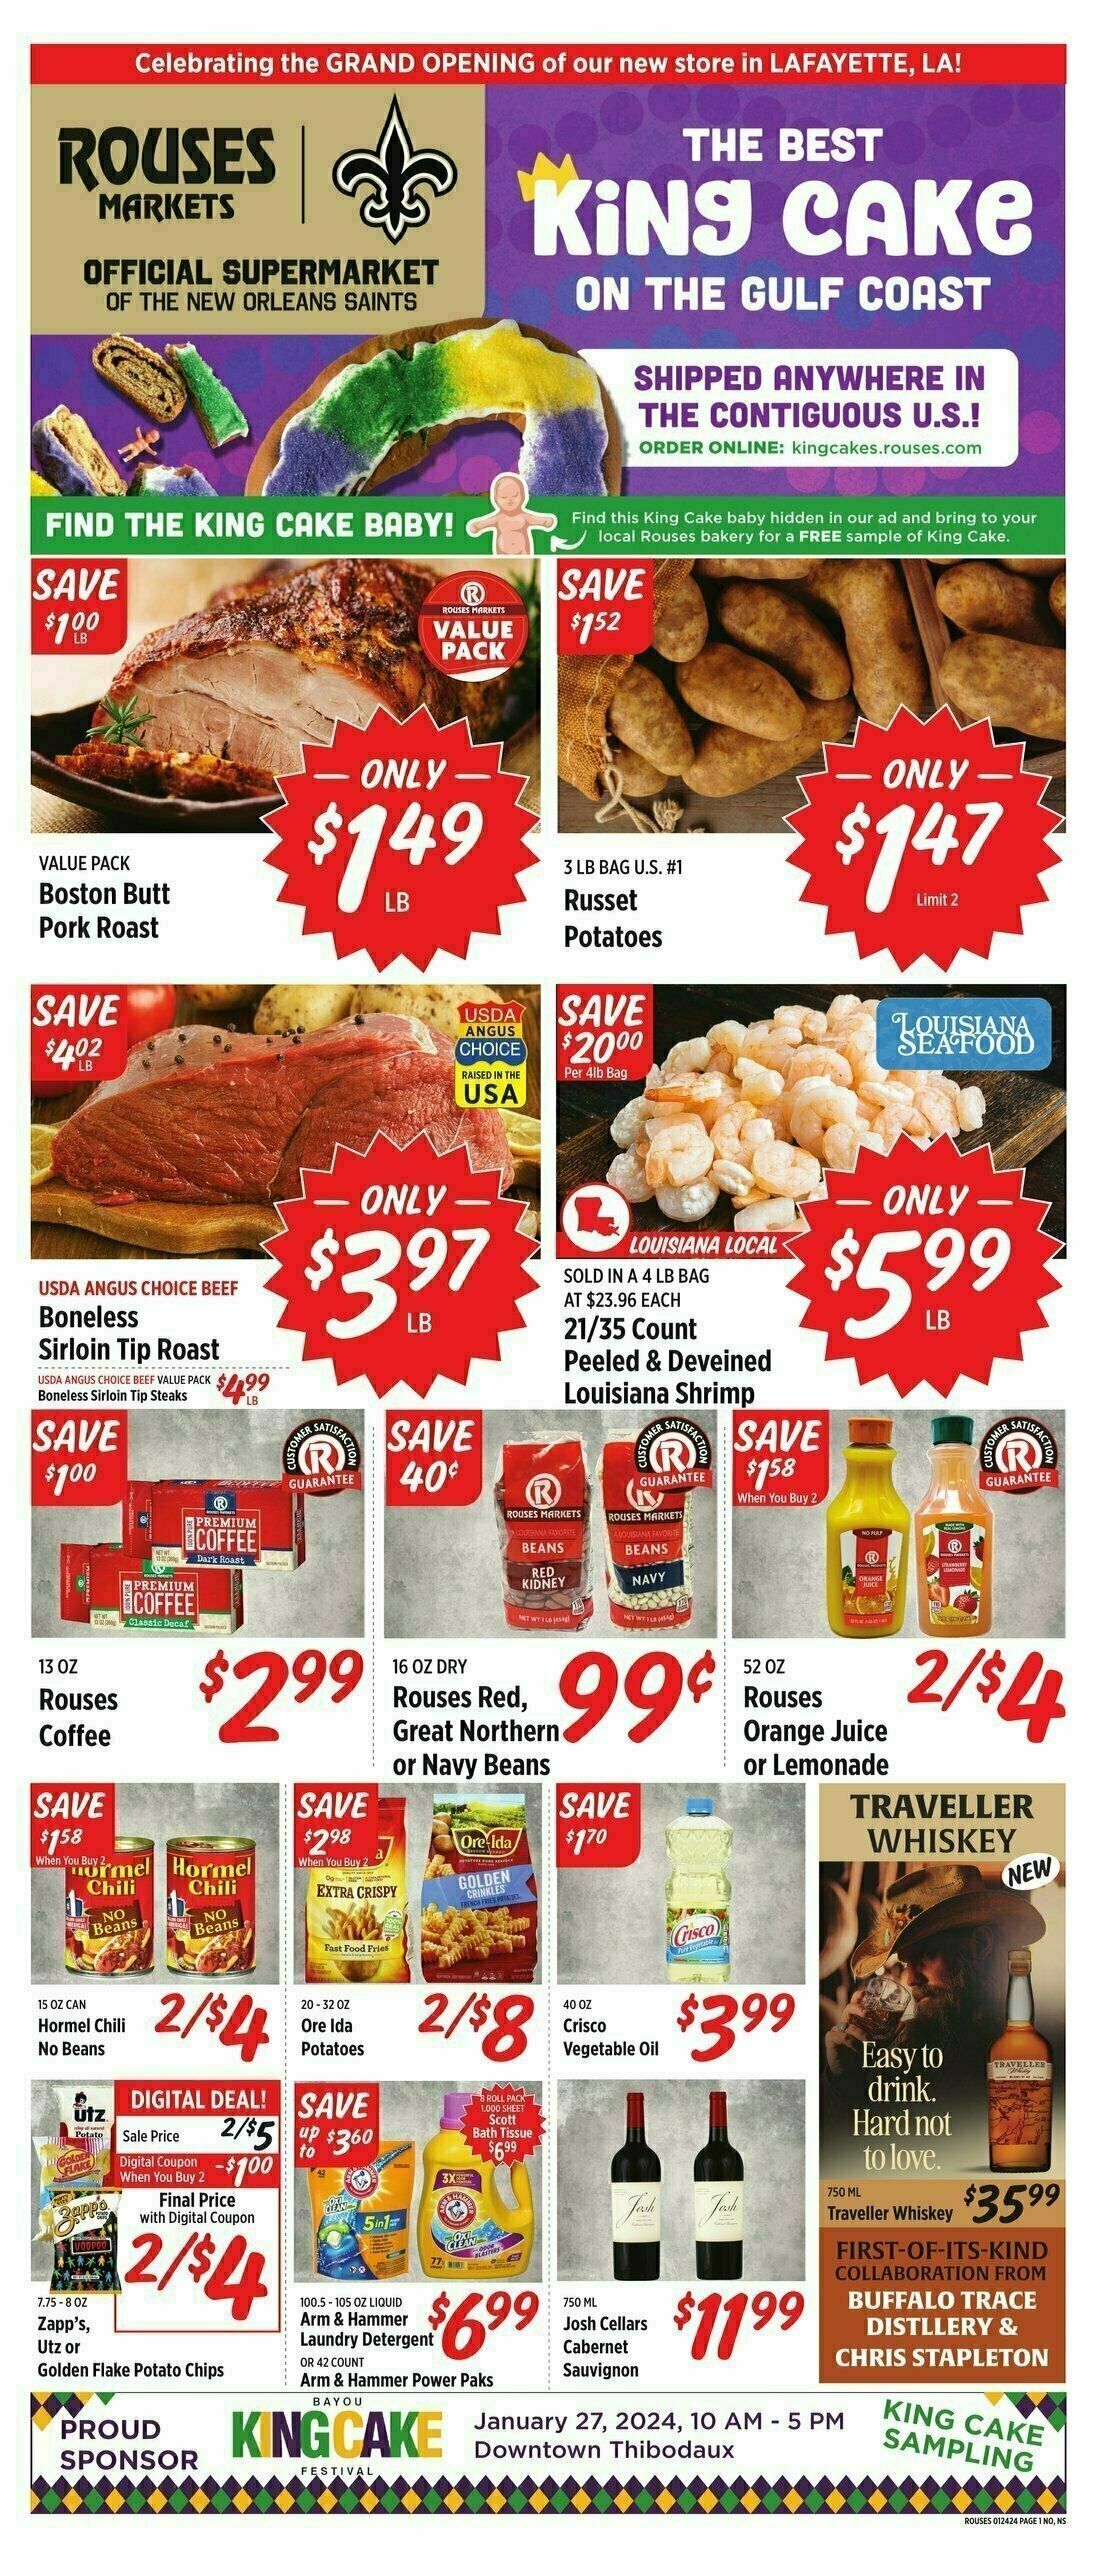 Rouses Markets Weekly Ad from January 25